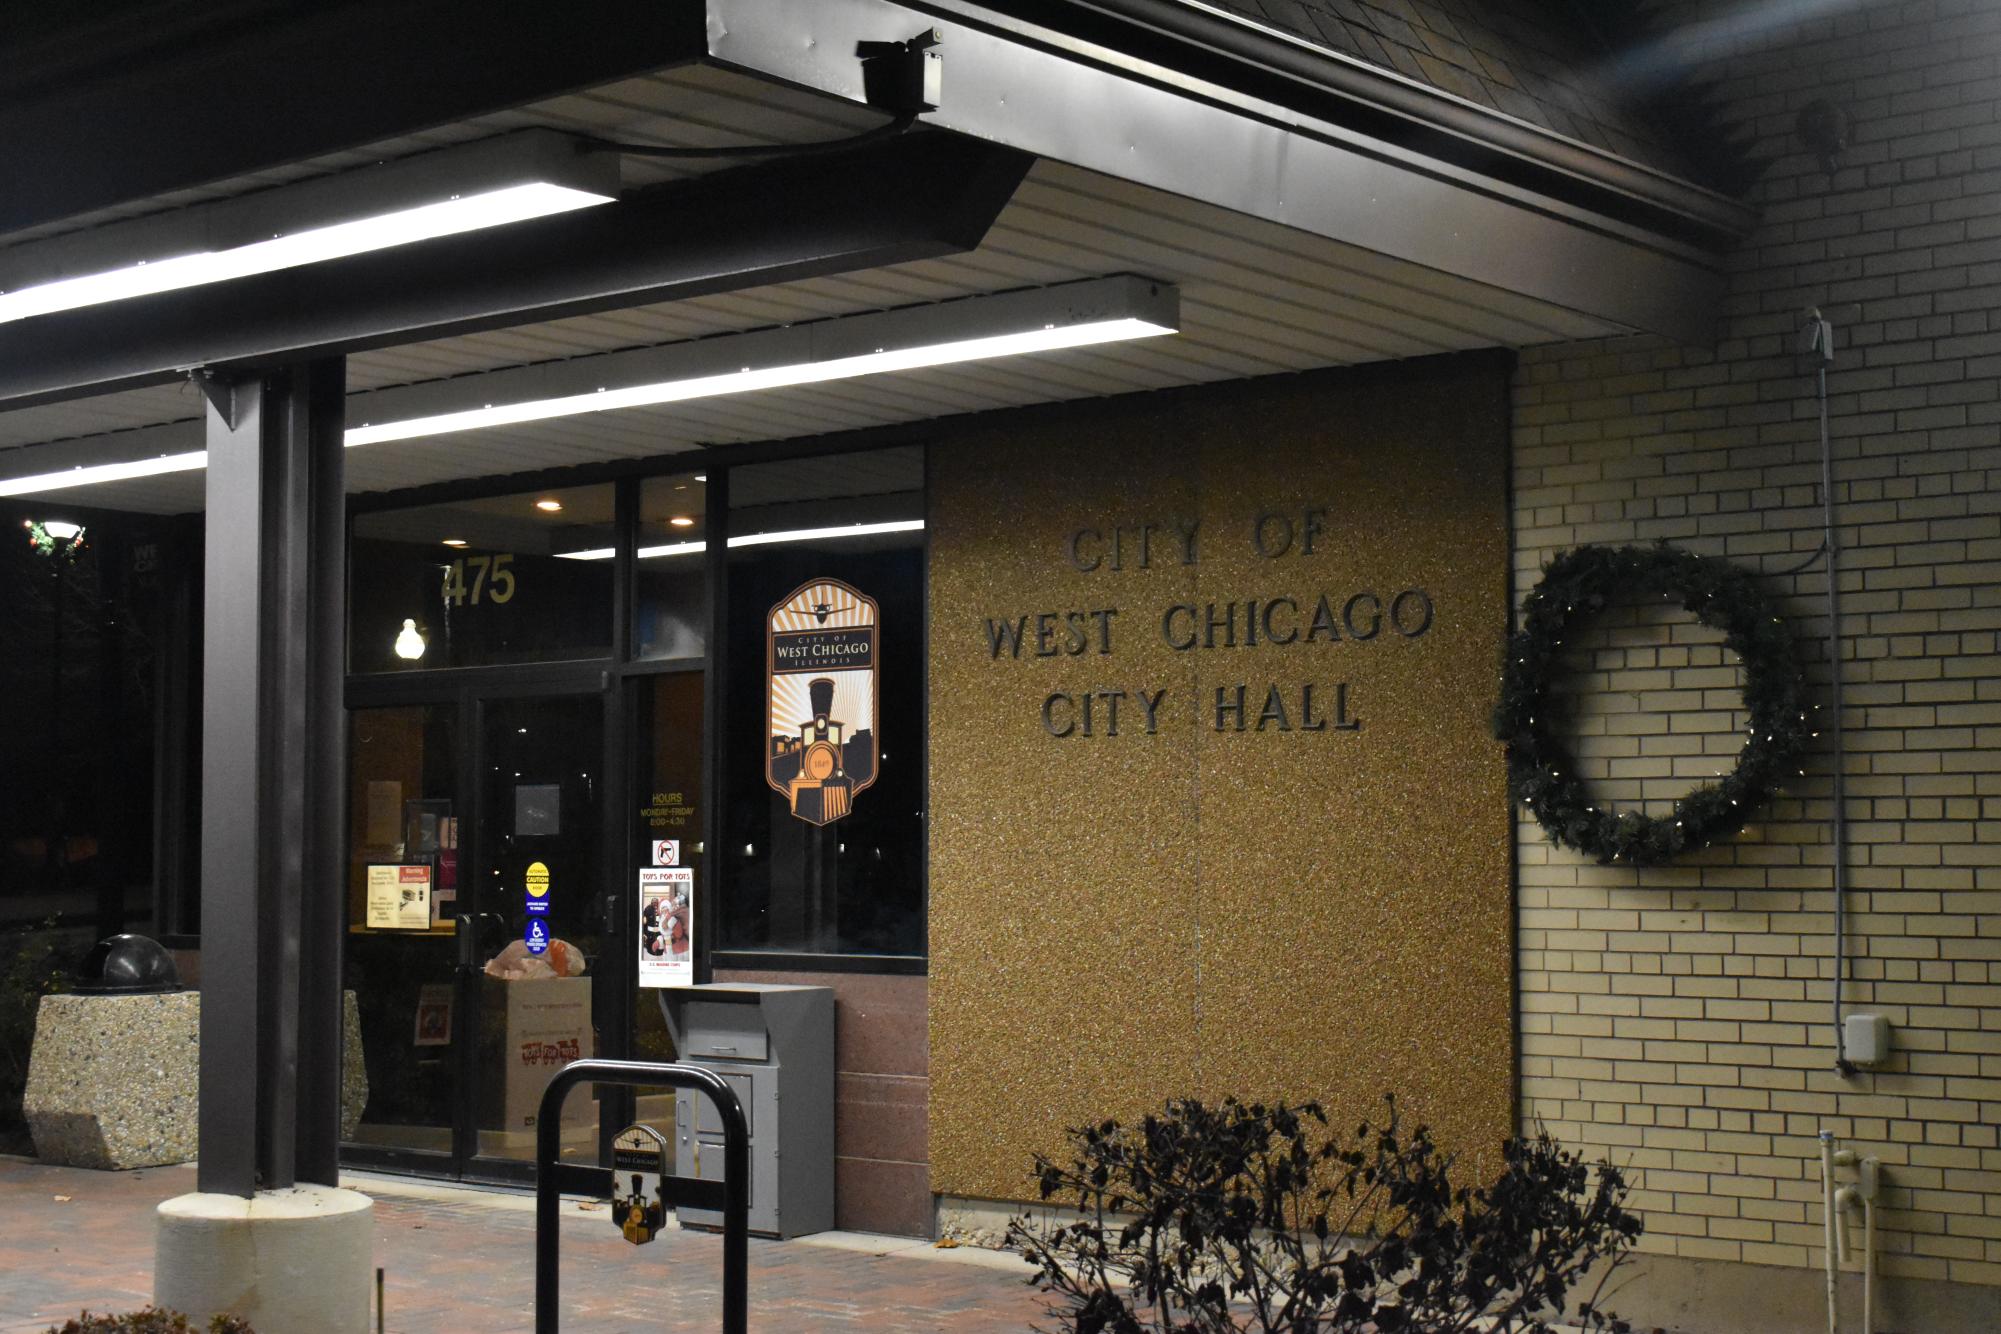 The City Council of West Chicago meets twice a month and the meeting is open to the public. 